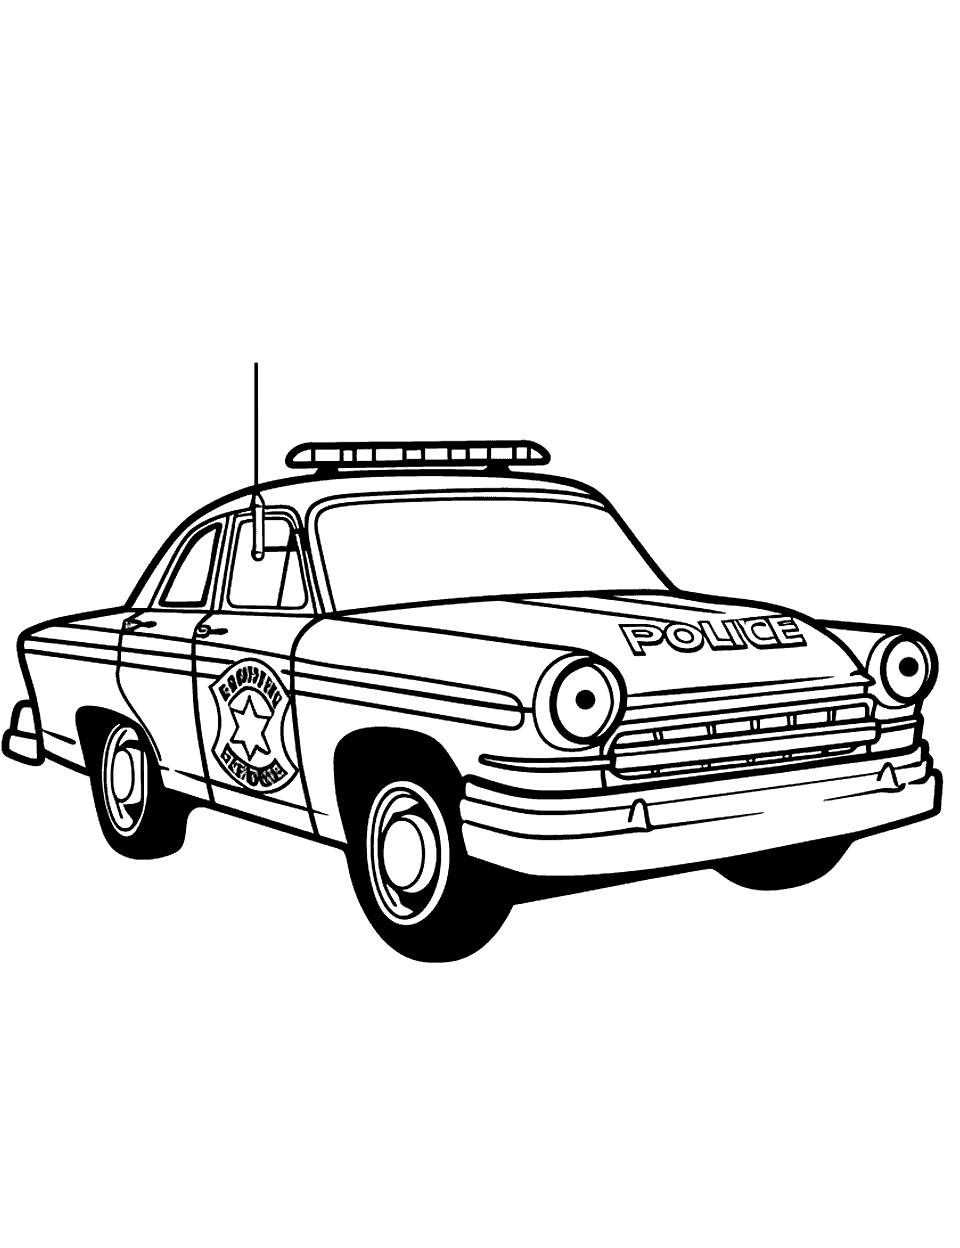 Vintage Police Car Display Coloring Page - An old-fashioned police car displayed at a local community fair.